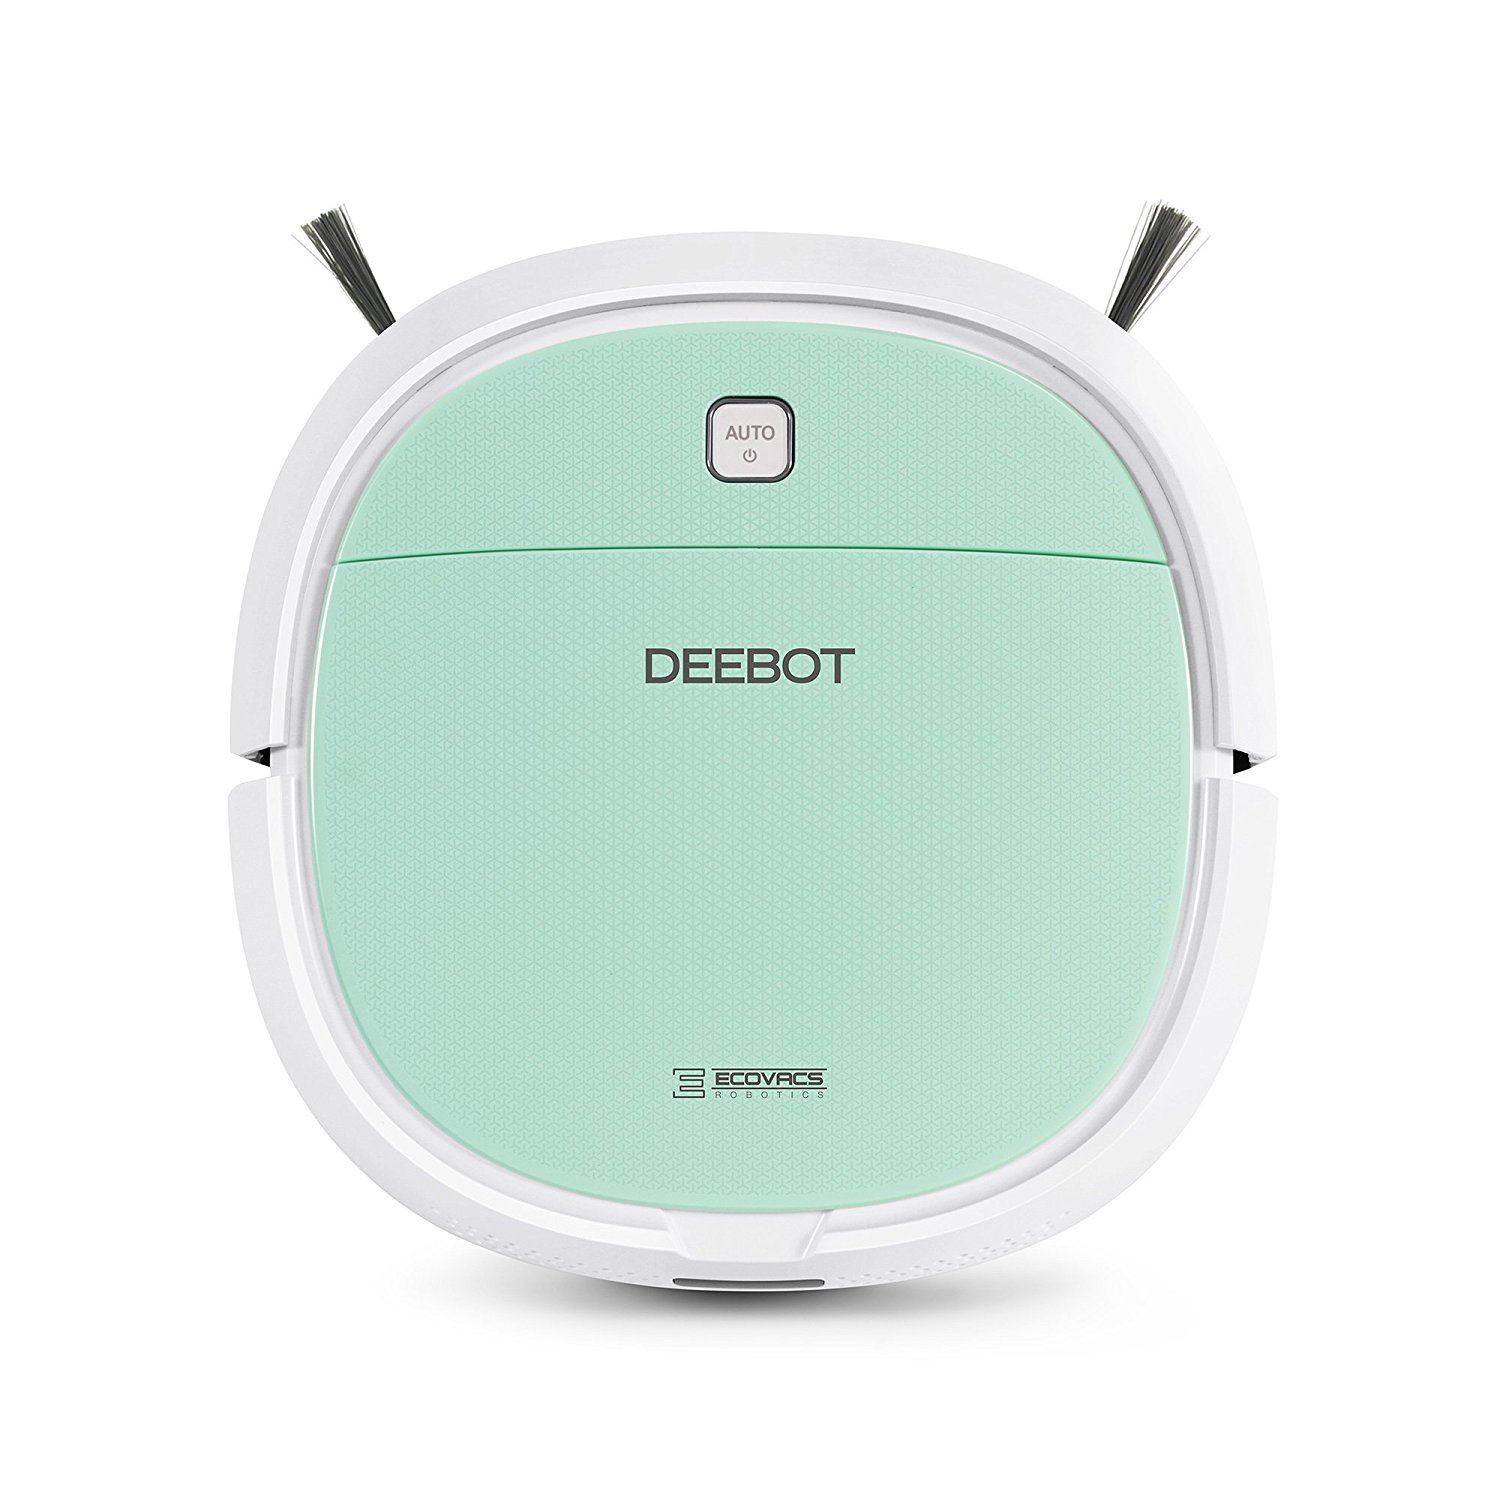 Today only: Ecovacs Deebot Mini 2 app-enabled robotic vacuum for $104